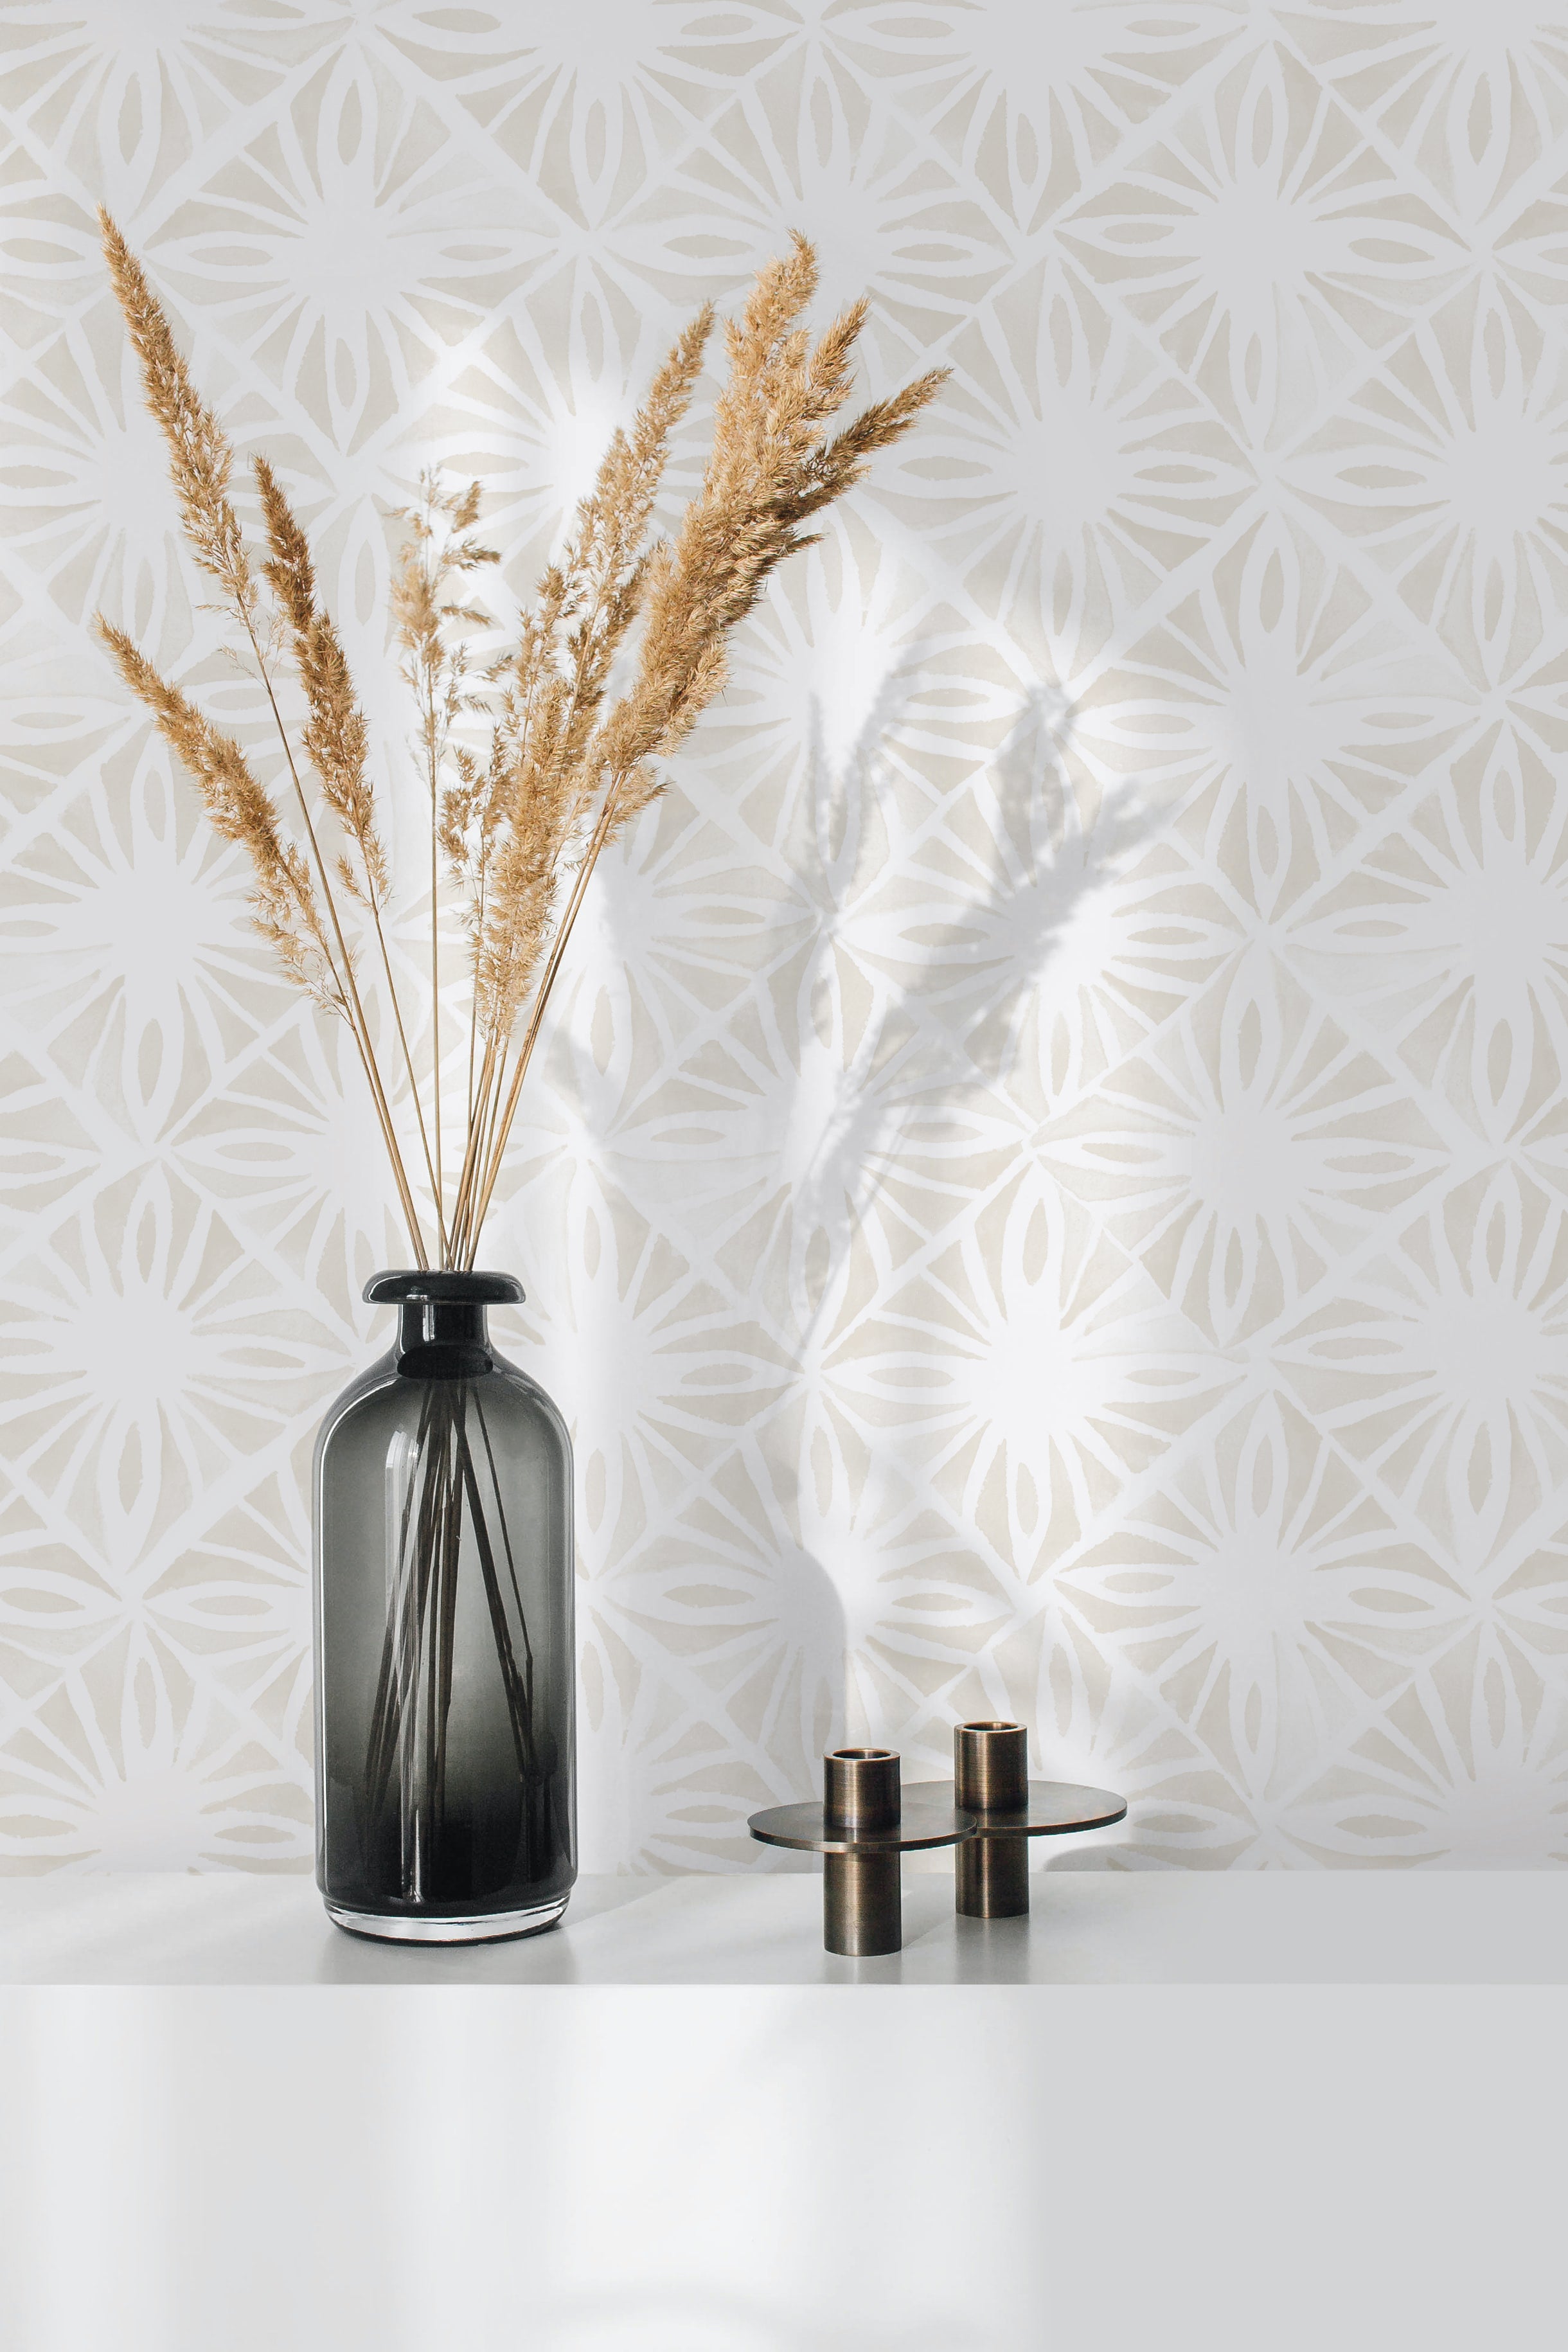 A minimalist home workspace is elevated by the Moroccan Tile Wallpaper II - Ecru, displaying an intricate pattern in soft ecru on a white background. The wallpaper adds a subtle, elegant touch to the room, complemented by a sleek black vase with dried pampas grass and simple metallic candle holders.